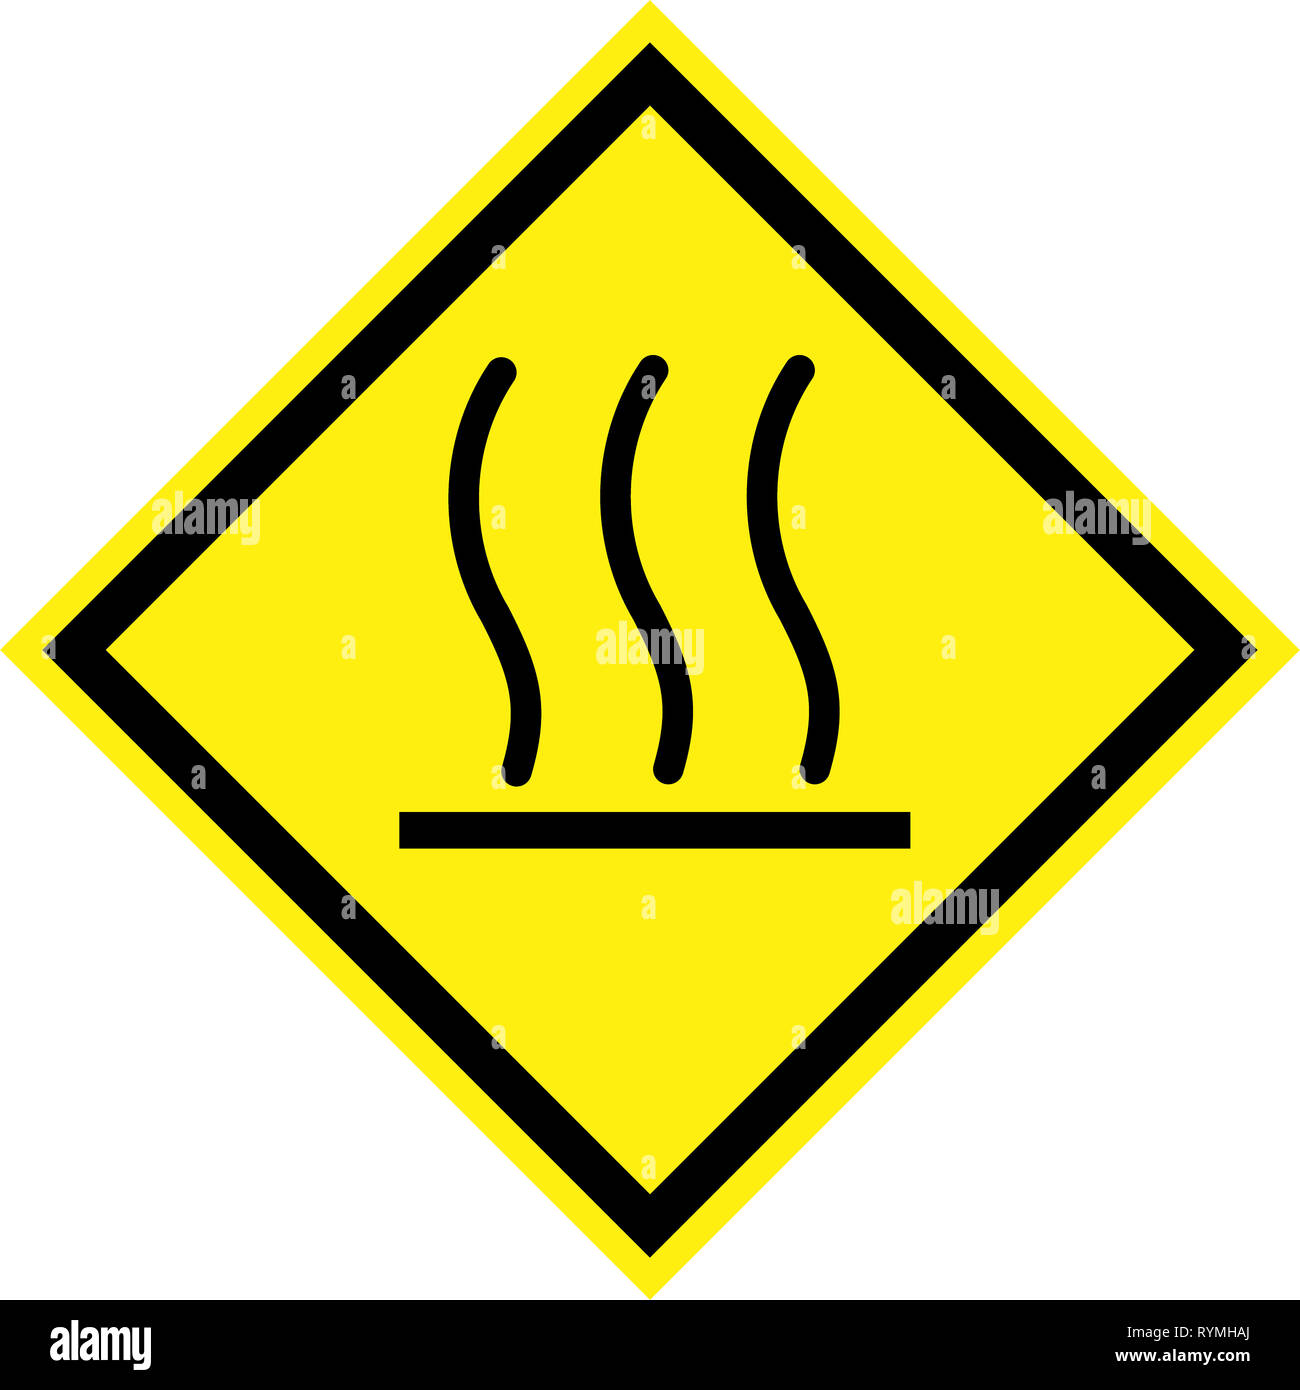 Yellow hazard sign with hot surface symbol Stock Photo